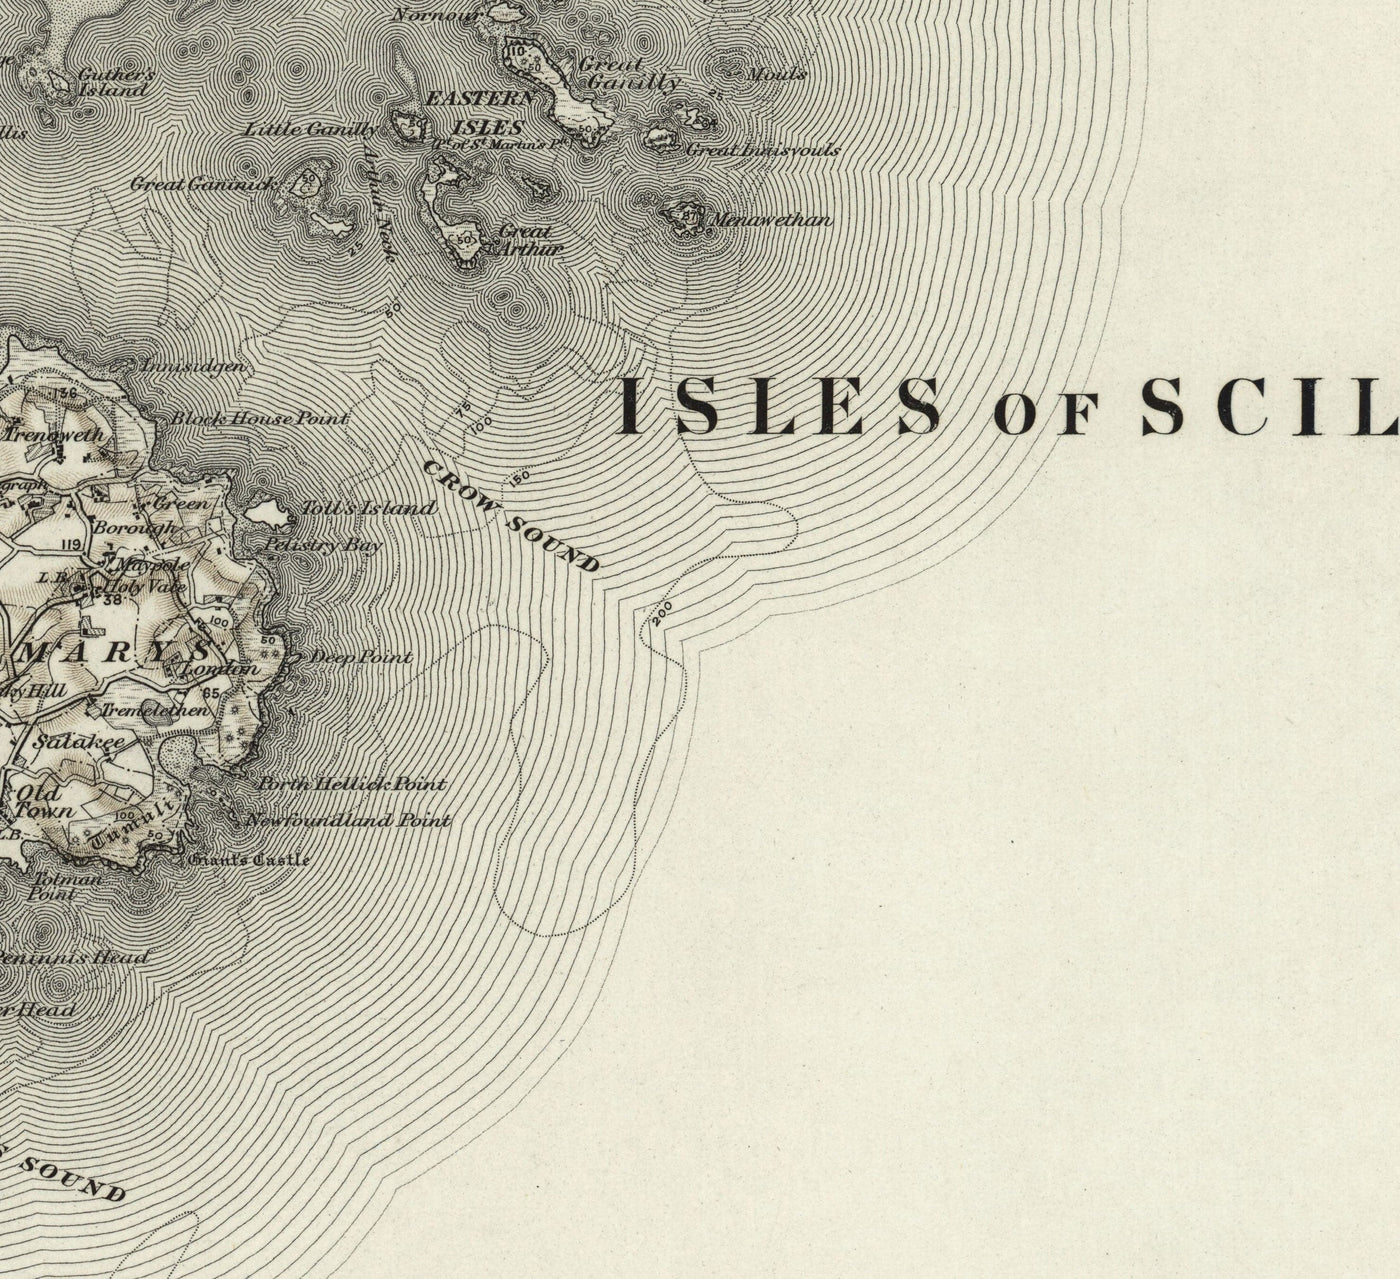 Old Map of Isles of Scilly, 1896 - St Mary, Martin, Agnes, Tresco, Bryher & Other Islands